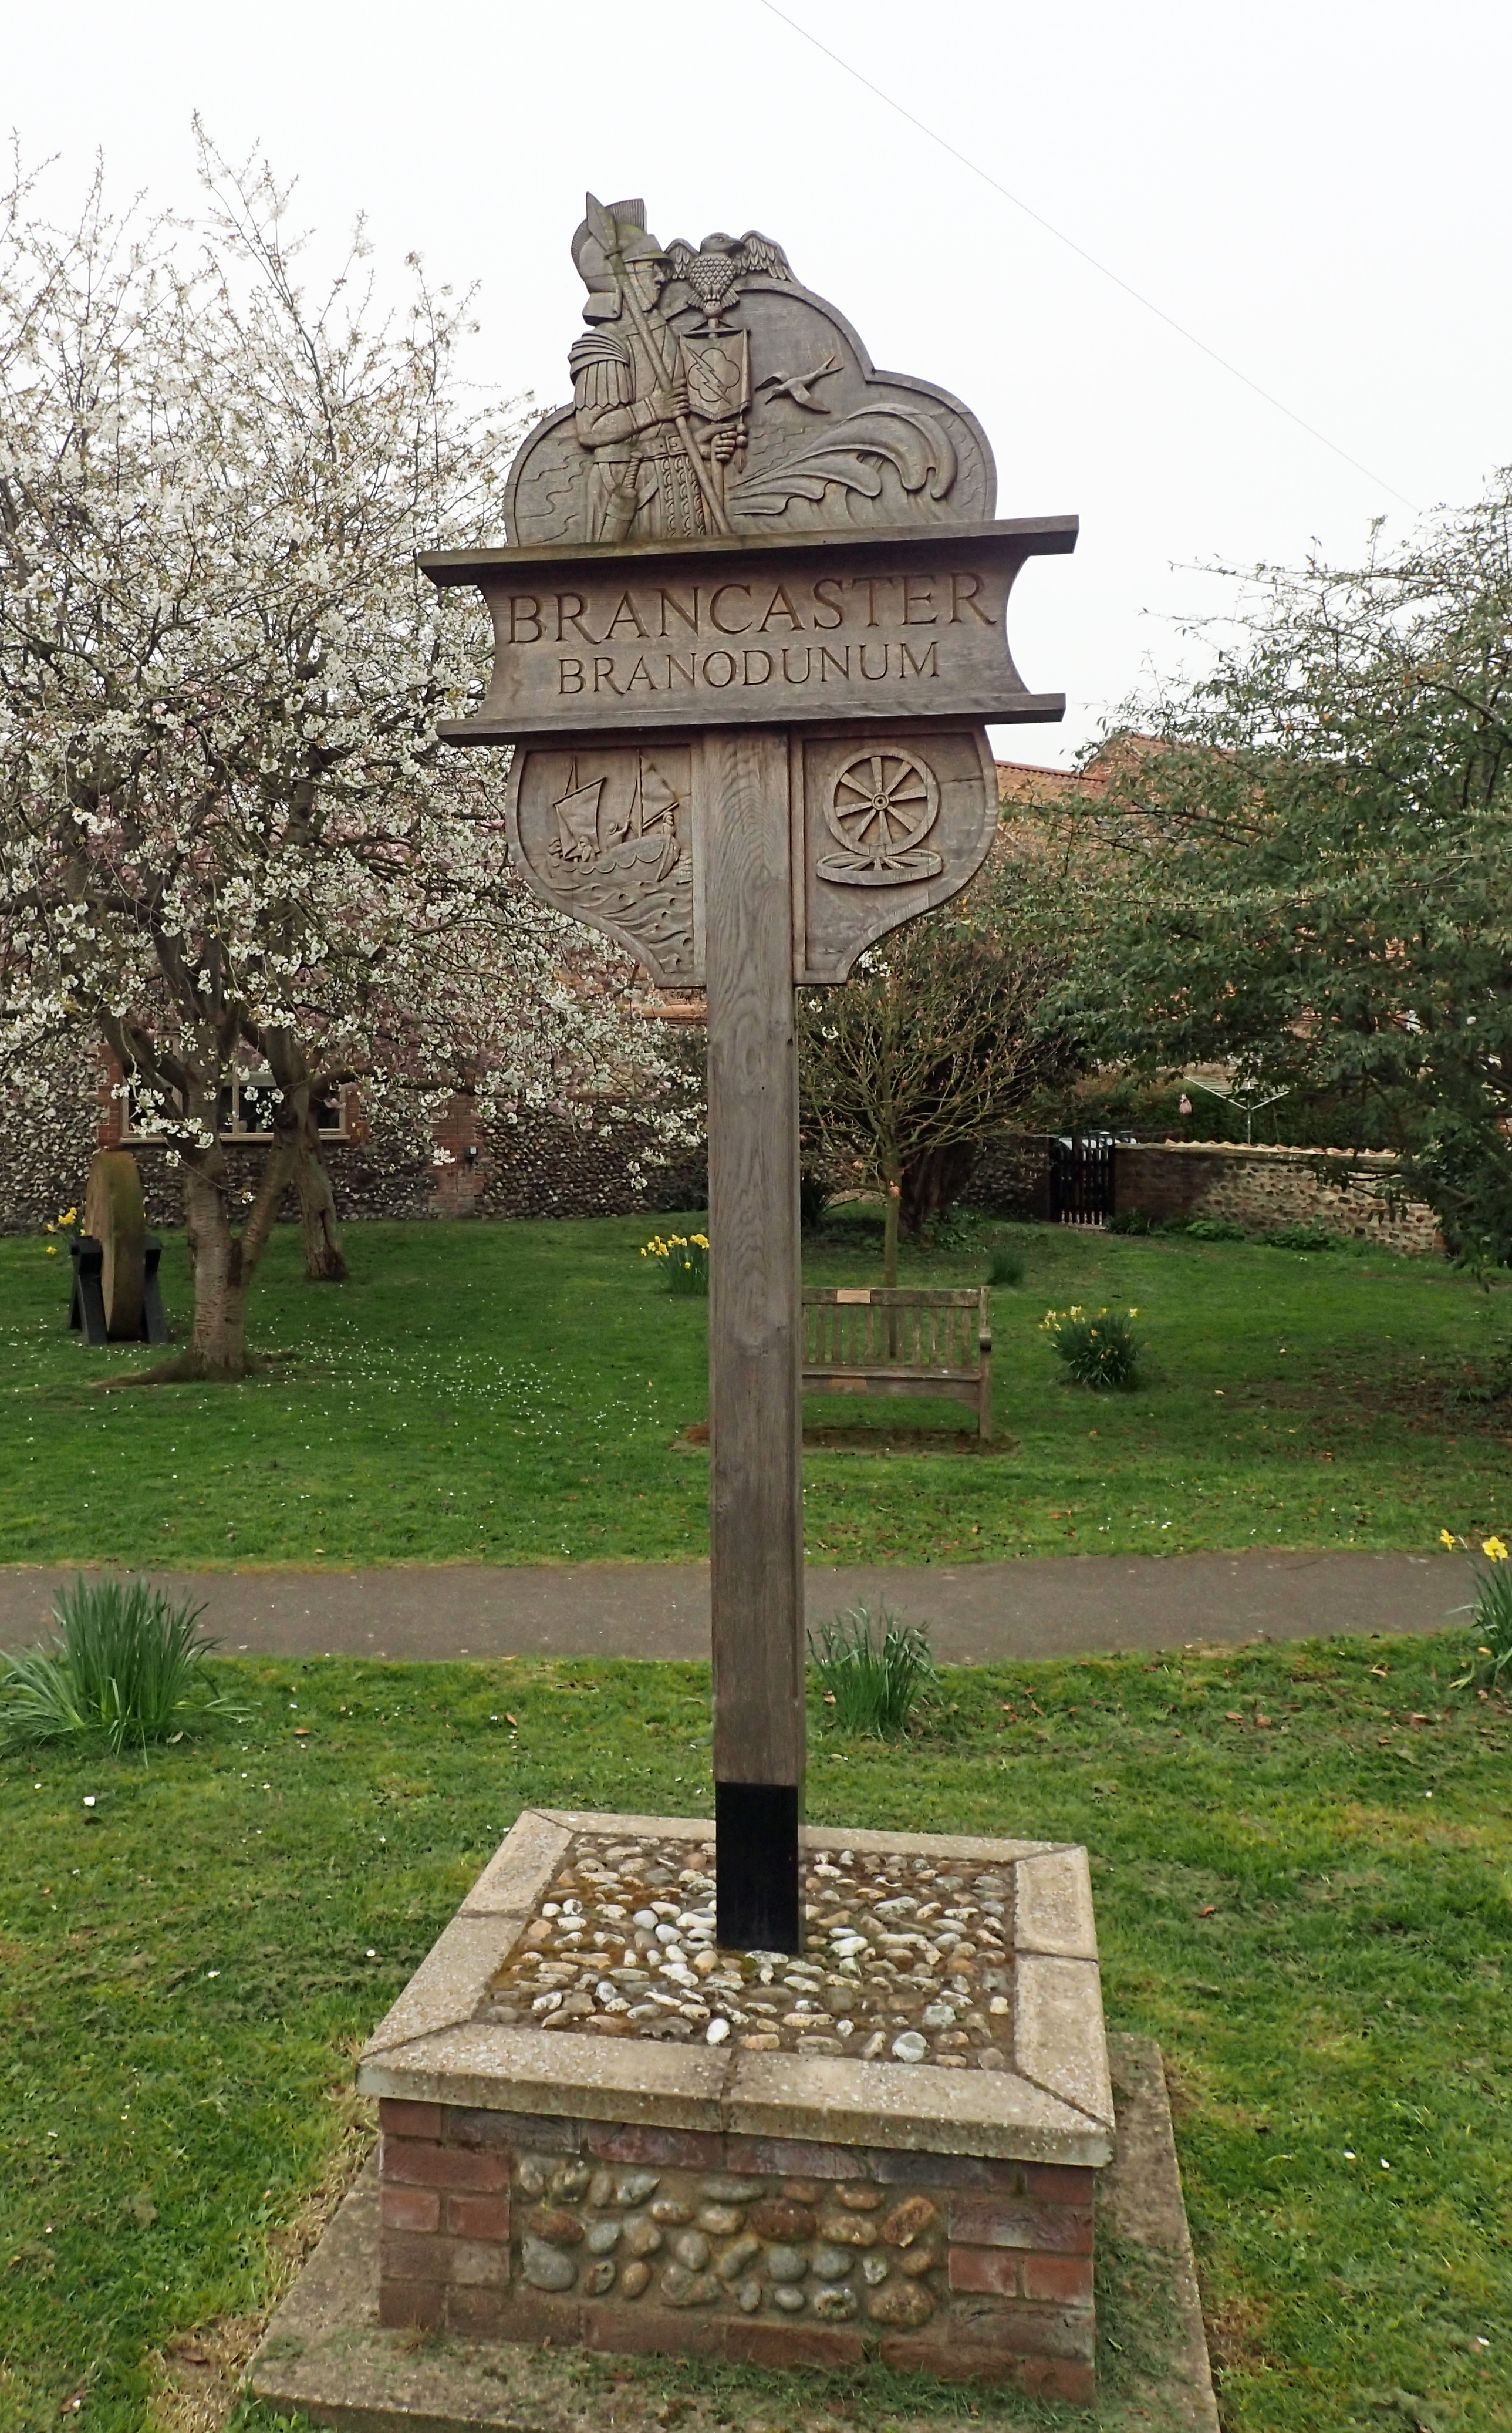 Brancaster village sign, passed on the Peddars Way and Norfolk Coast Path